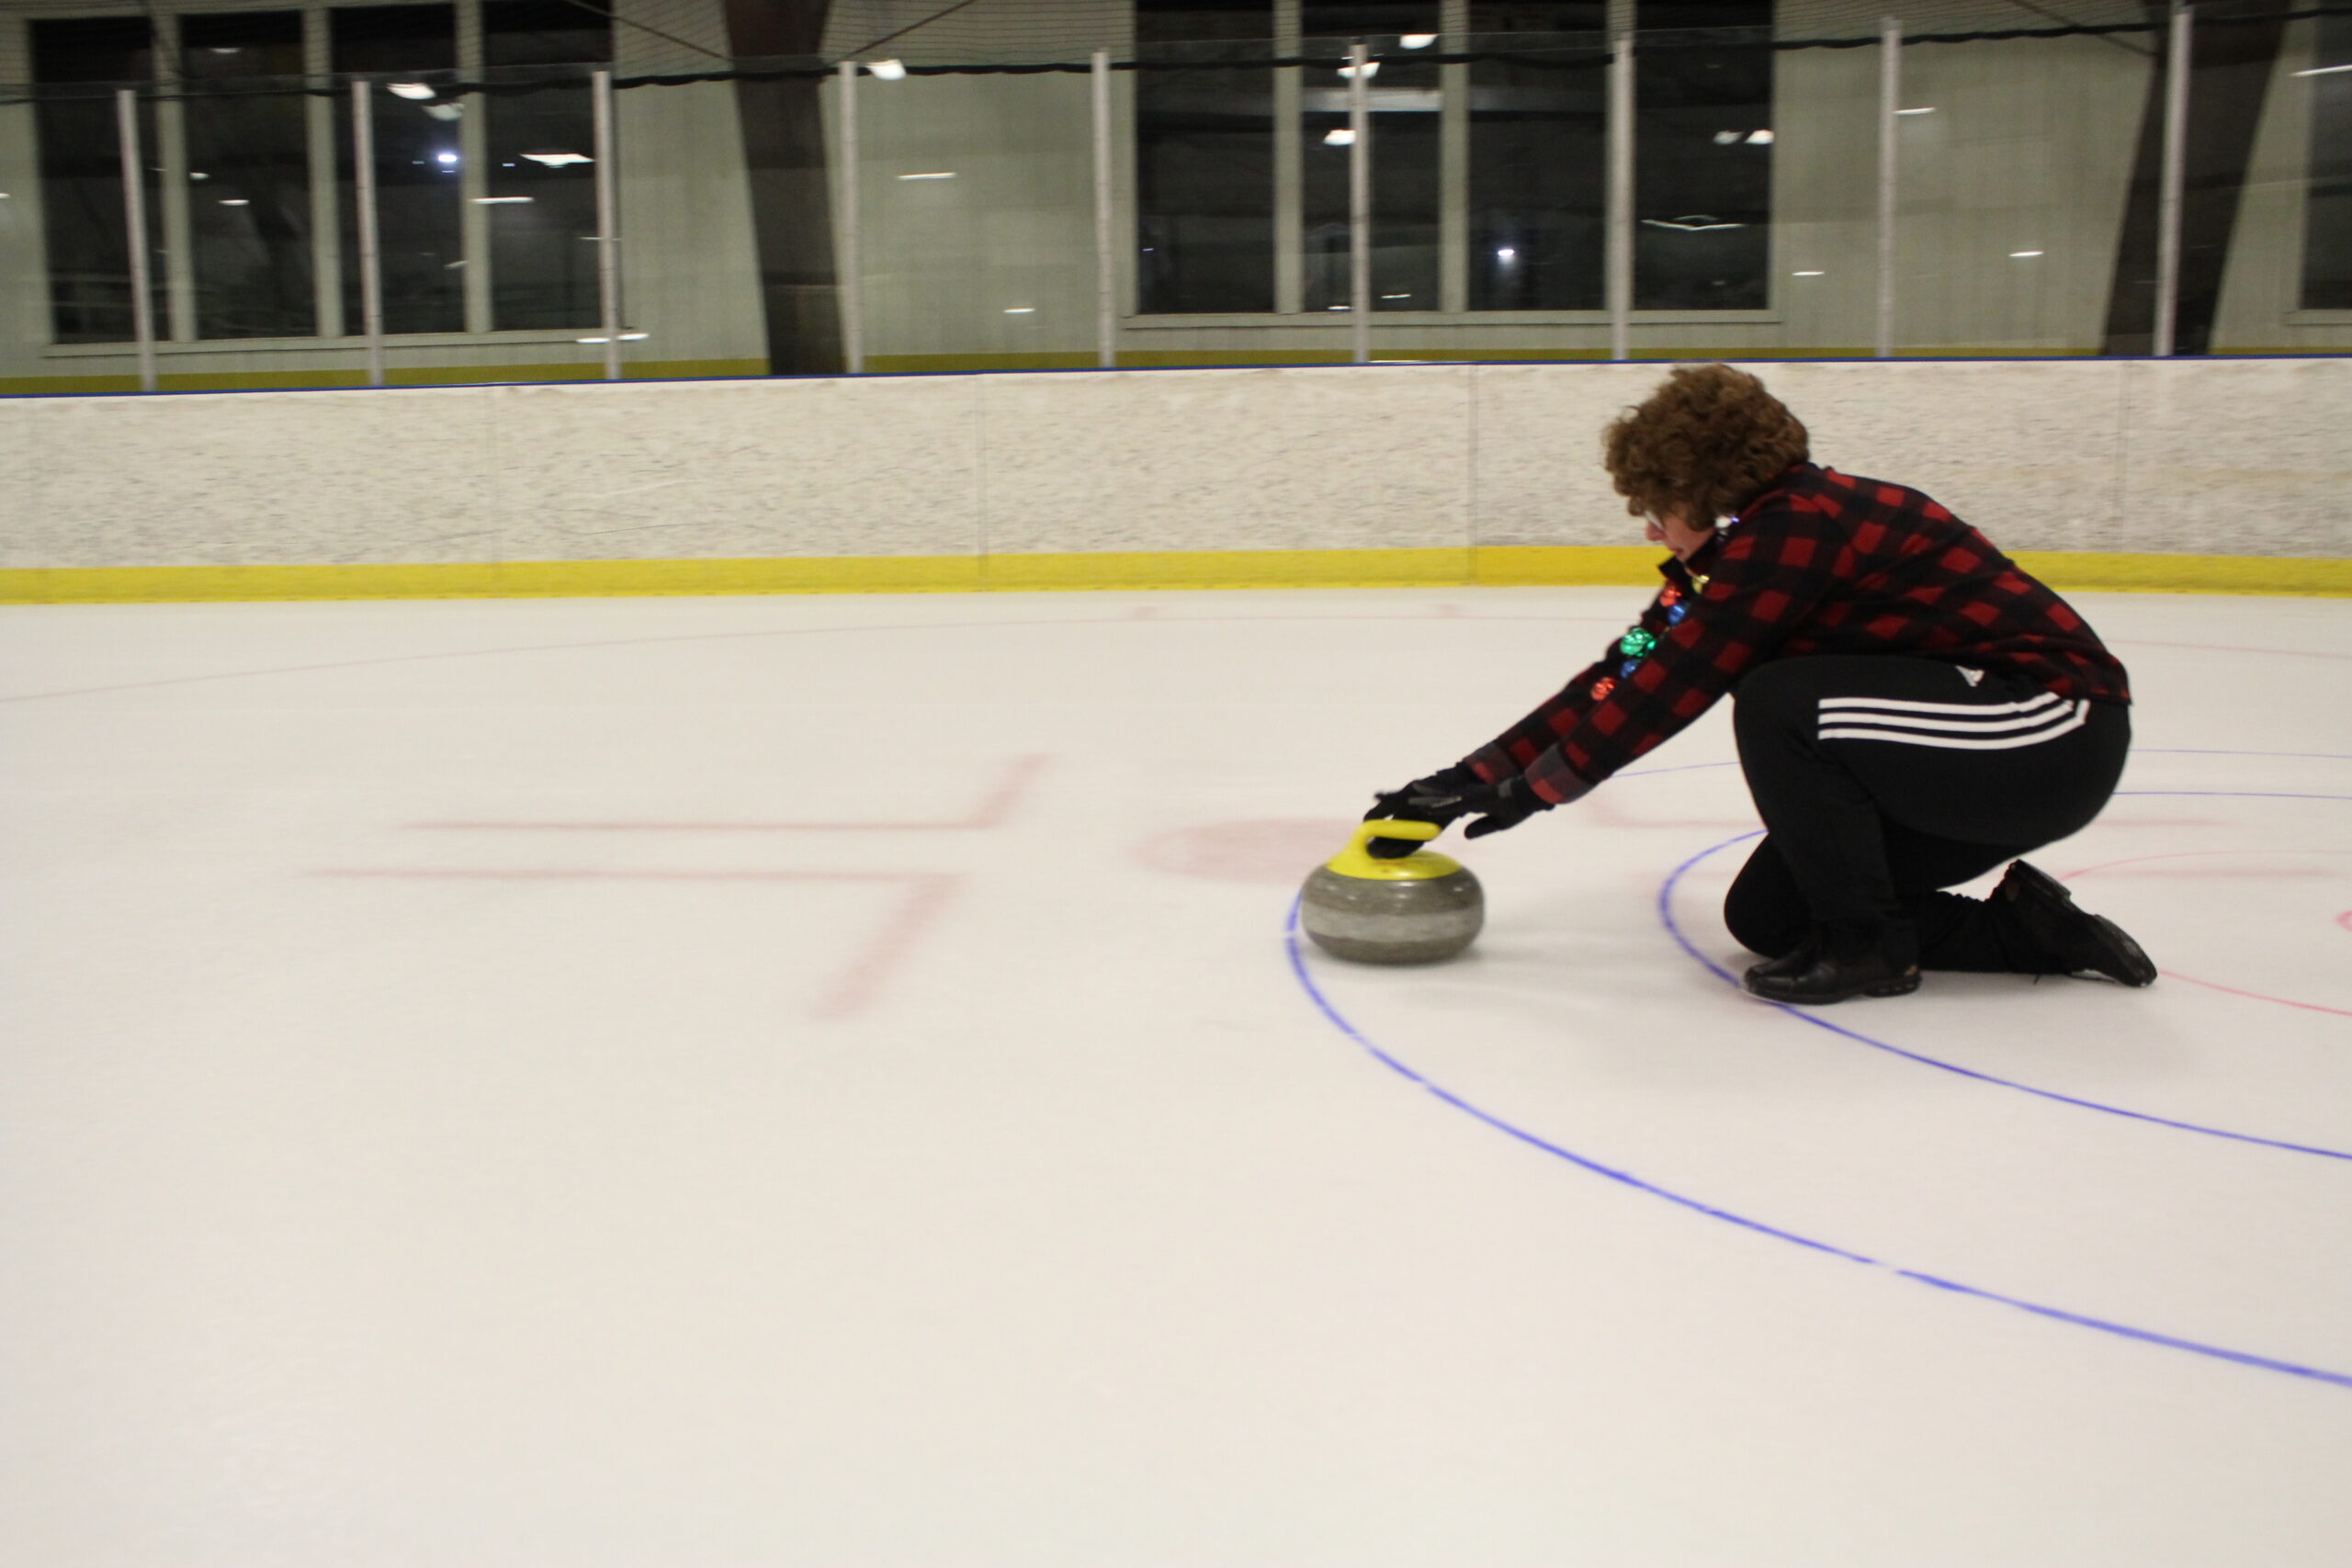 Heather Barclay tests the ice conditions at the at the Morgantown Ice Arena Saturday night by curling a stone down the ice.